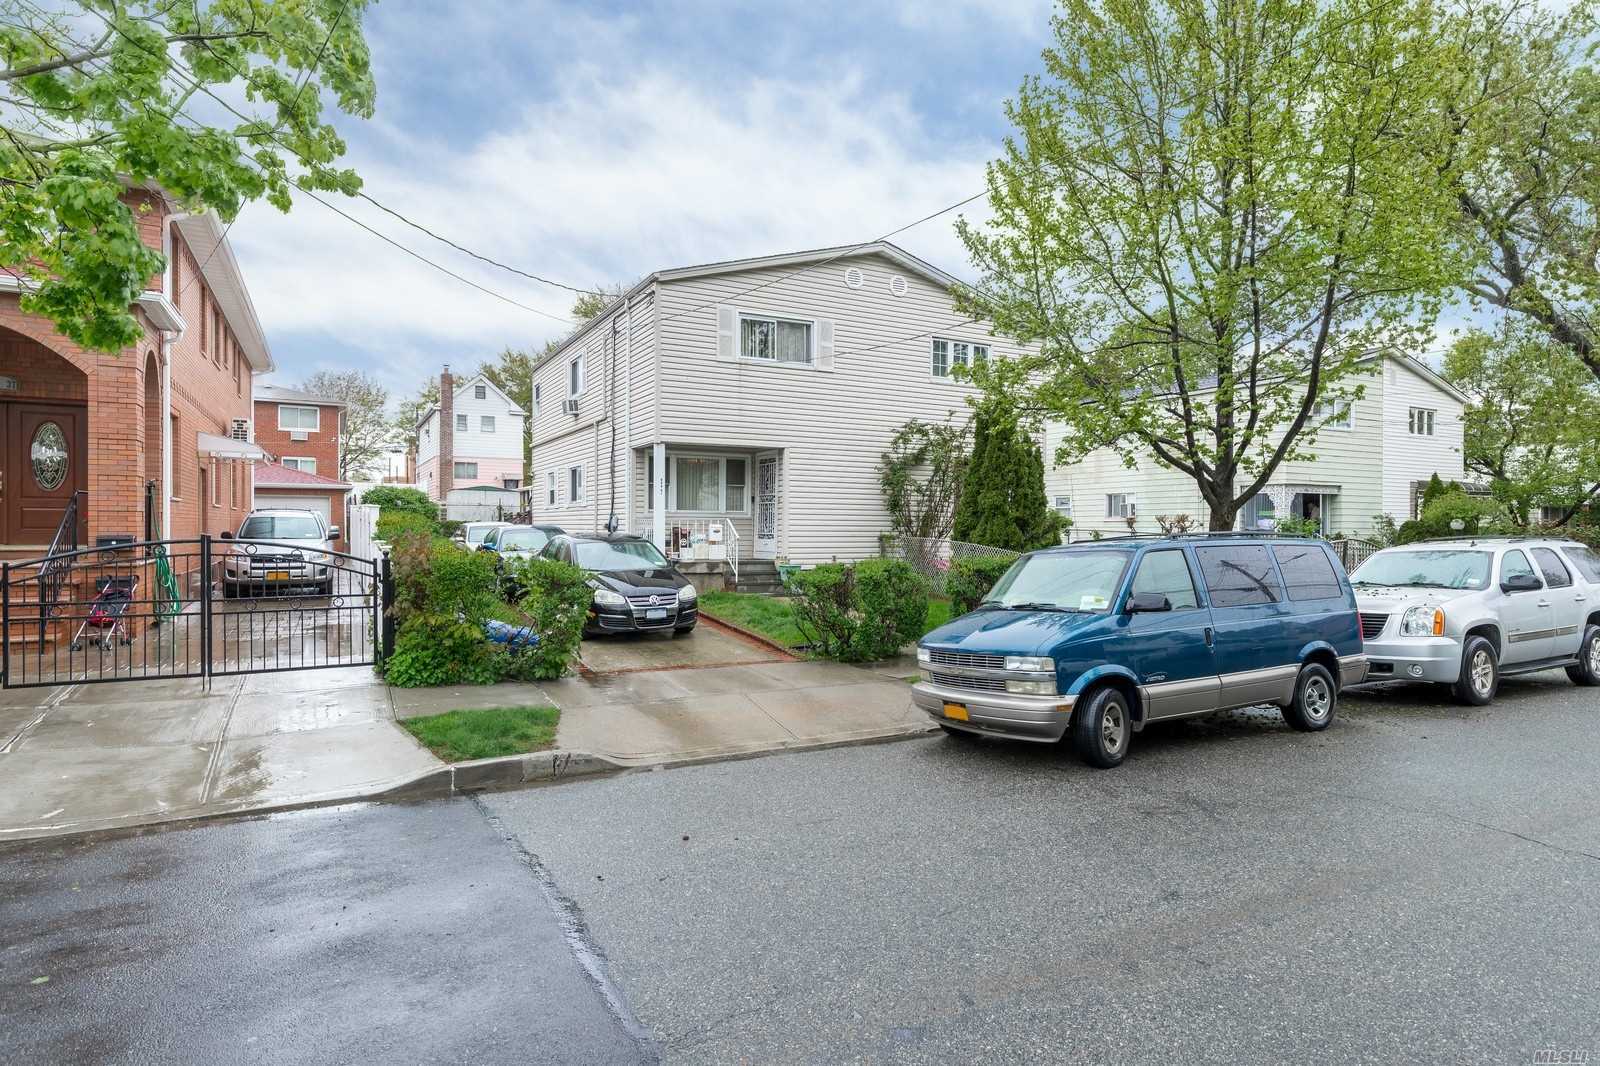 Location , Location Location !!! One Block To Northern Blvd,  Bus Q12/13/27/31 block away To 295. , Minutes to school MS 158. Bayside/LIRR to house about 0.4 Miles. semi-detached house 3 bedrooms & 1.5 baths in Bayside , Lot : 31.5x100, Building 16x33 Size , Tax abatement with Star/Senior&Veterans $2195. Split AC UNIT , nice garden-yard .owner want to hear all offers.